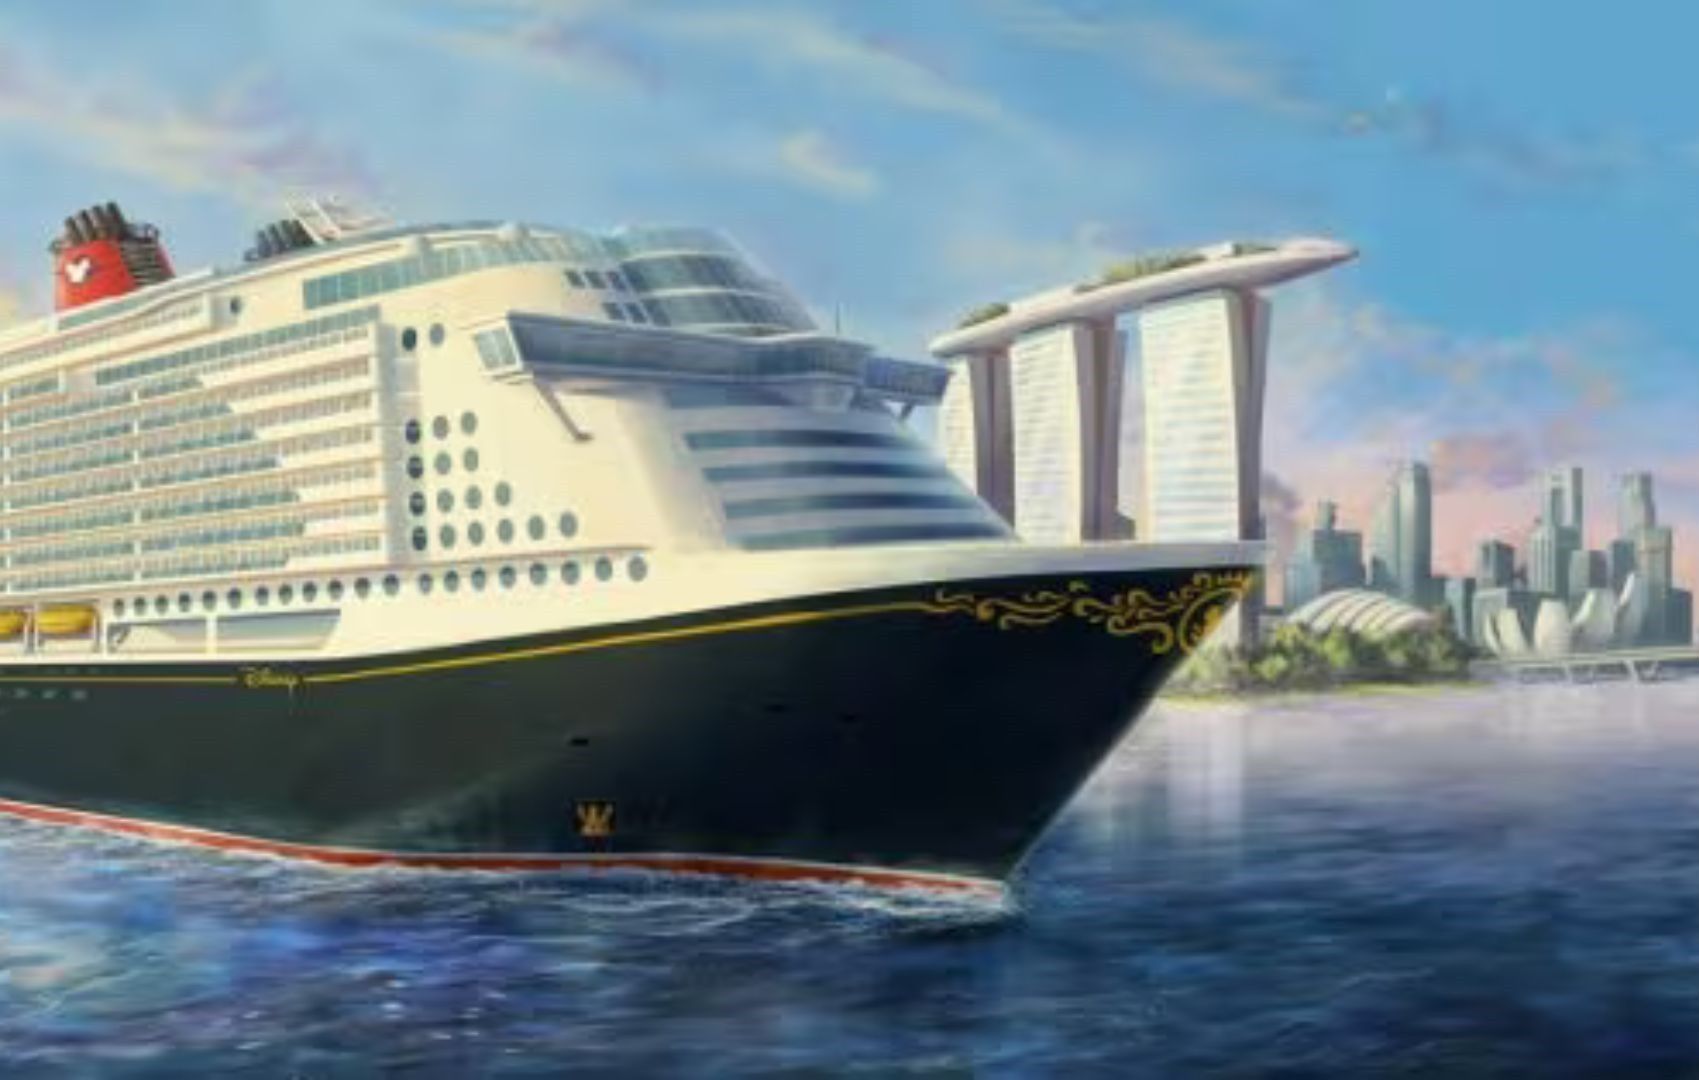 Disney unveils first 'eco' cruise ship visiting Southeast Asia